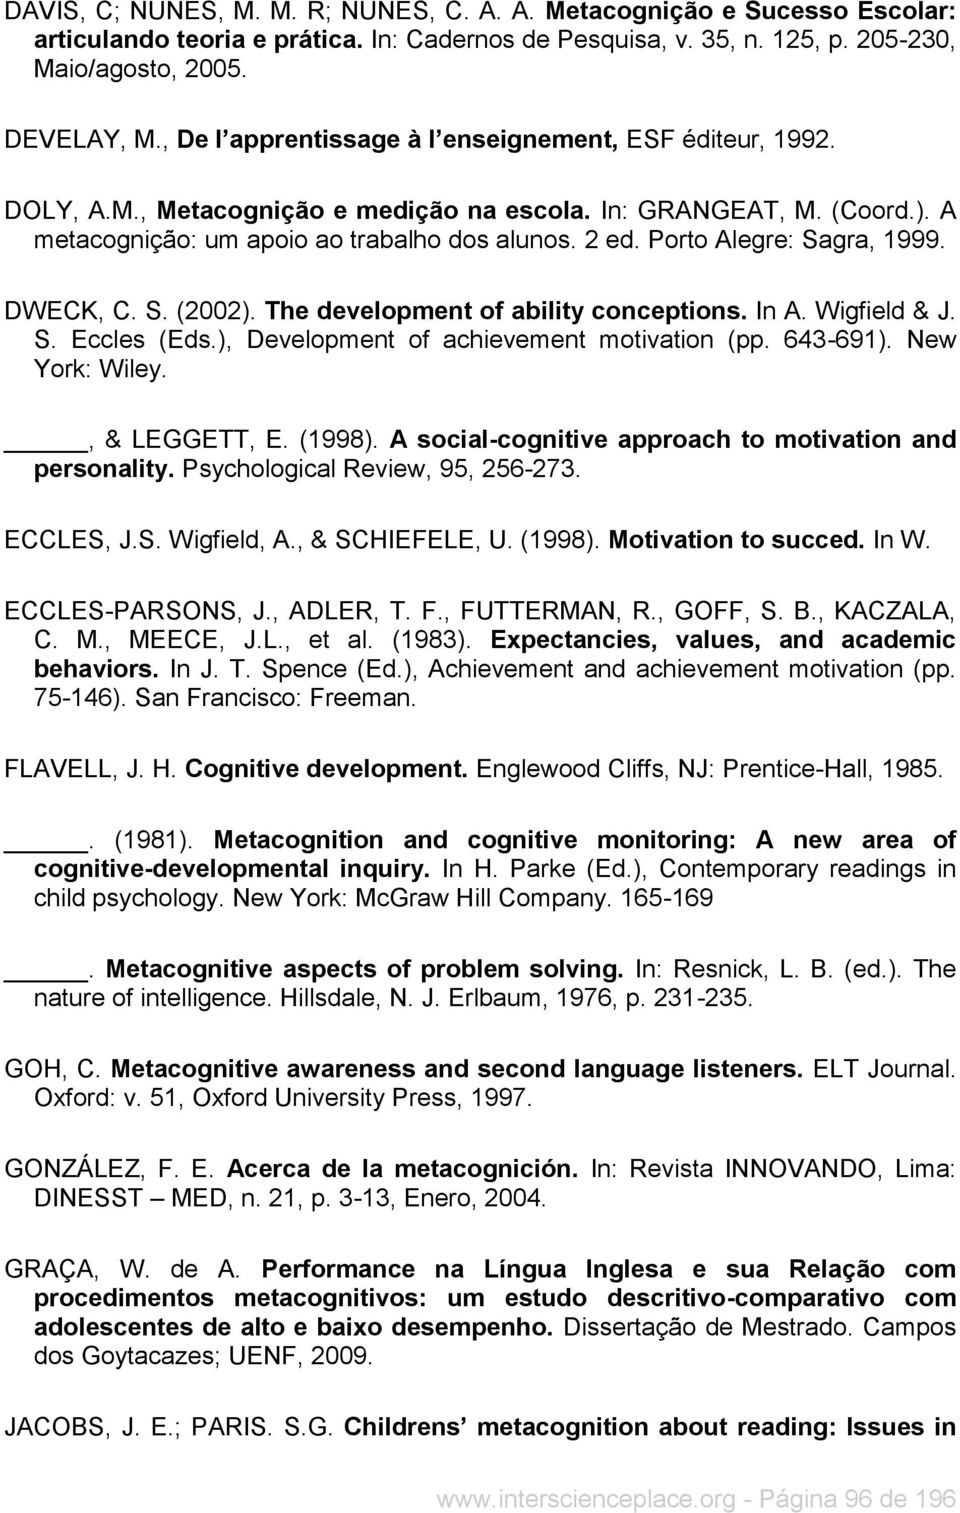 Porto Alegre: Sagra, 1999. DWECK, C. S. (2002). The development of ability conceptions. In A. Wigfield & J. S. Eccles (Eds.), Development of achievement motivation (pp. 643-691). New York: Wiley.